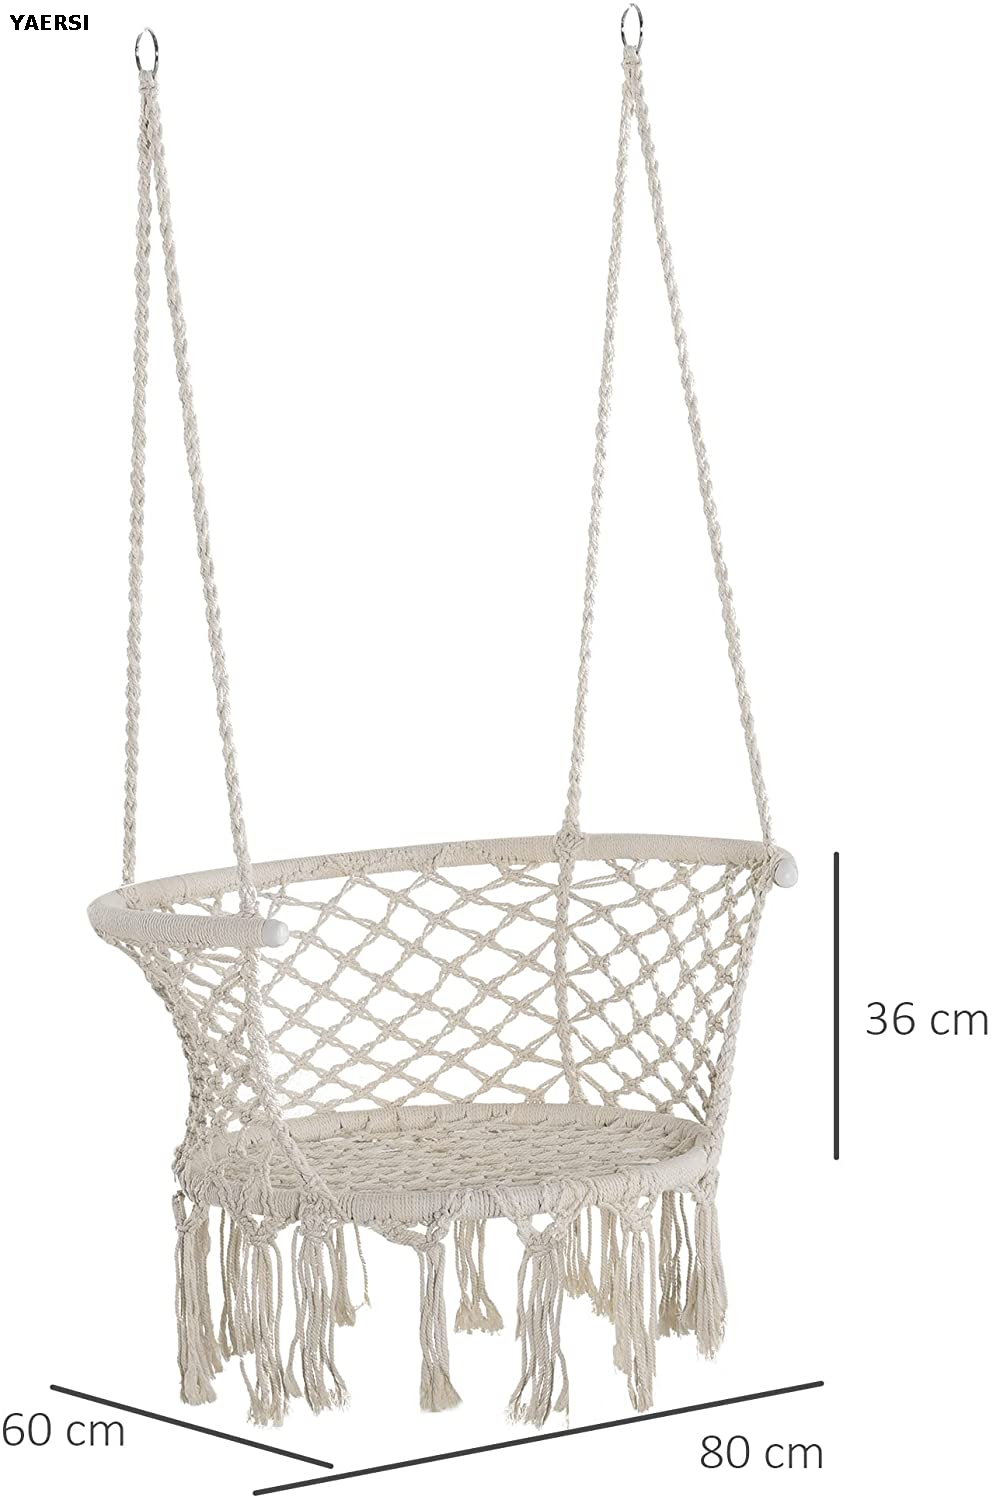 Semicircle Macrame Hammock Swing Chair for Inddor And Outdoor